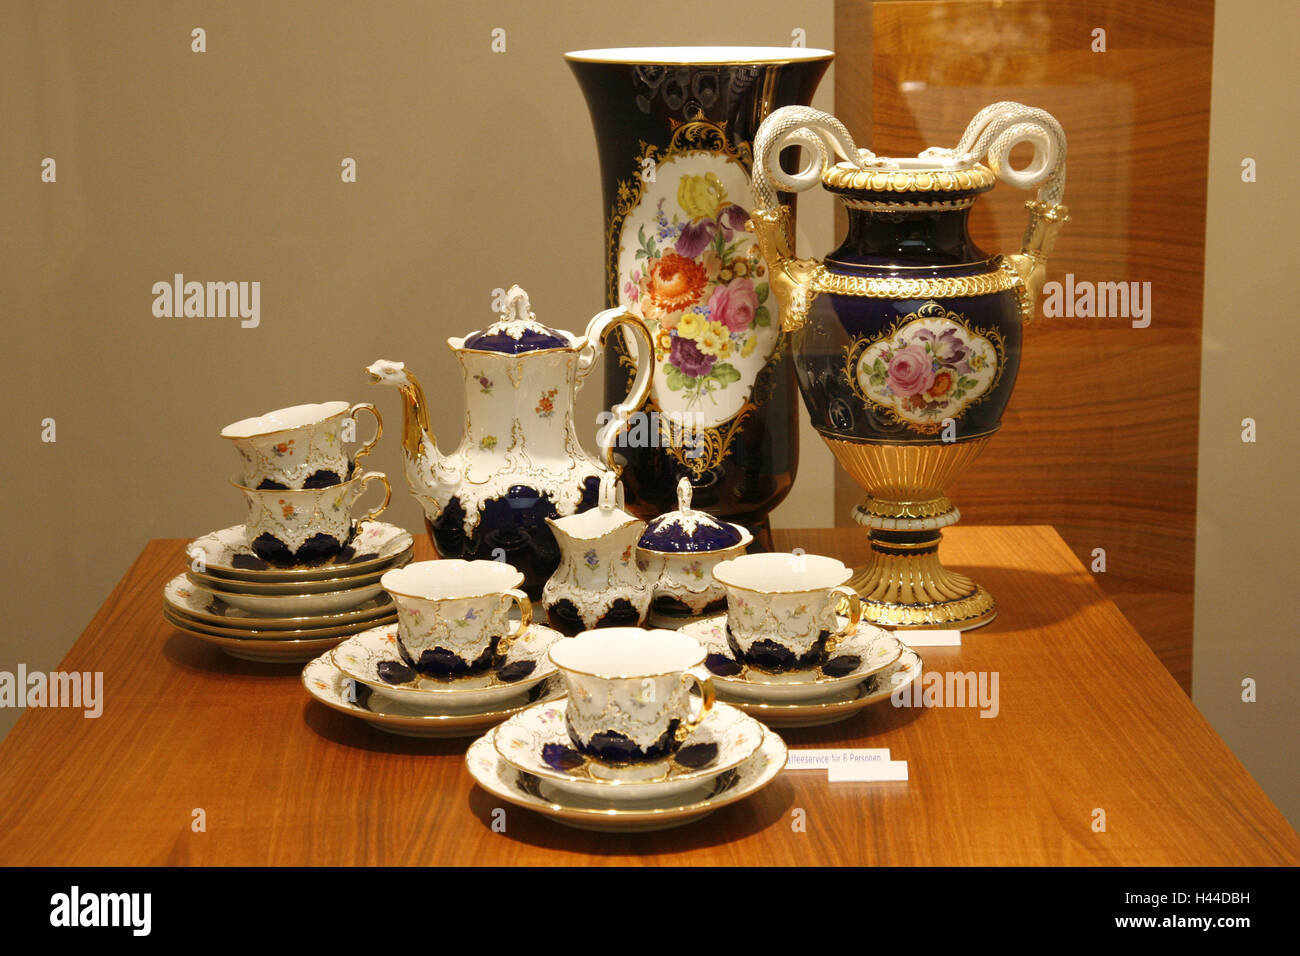 Germany, Saxony, Meissen, porcelain manufacture, showroom, coffee service, manufacture, exhibits, exhibit, coffee, service, porcelain, tourism, dishes, coffee things, cups, coffeepot, vases, flower motifs, design, Stock Photo